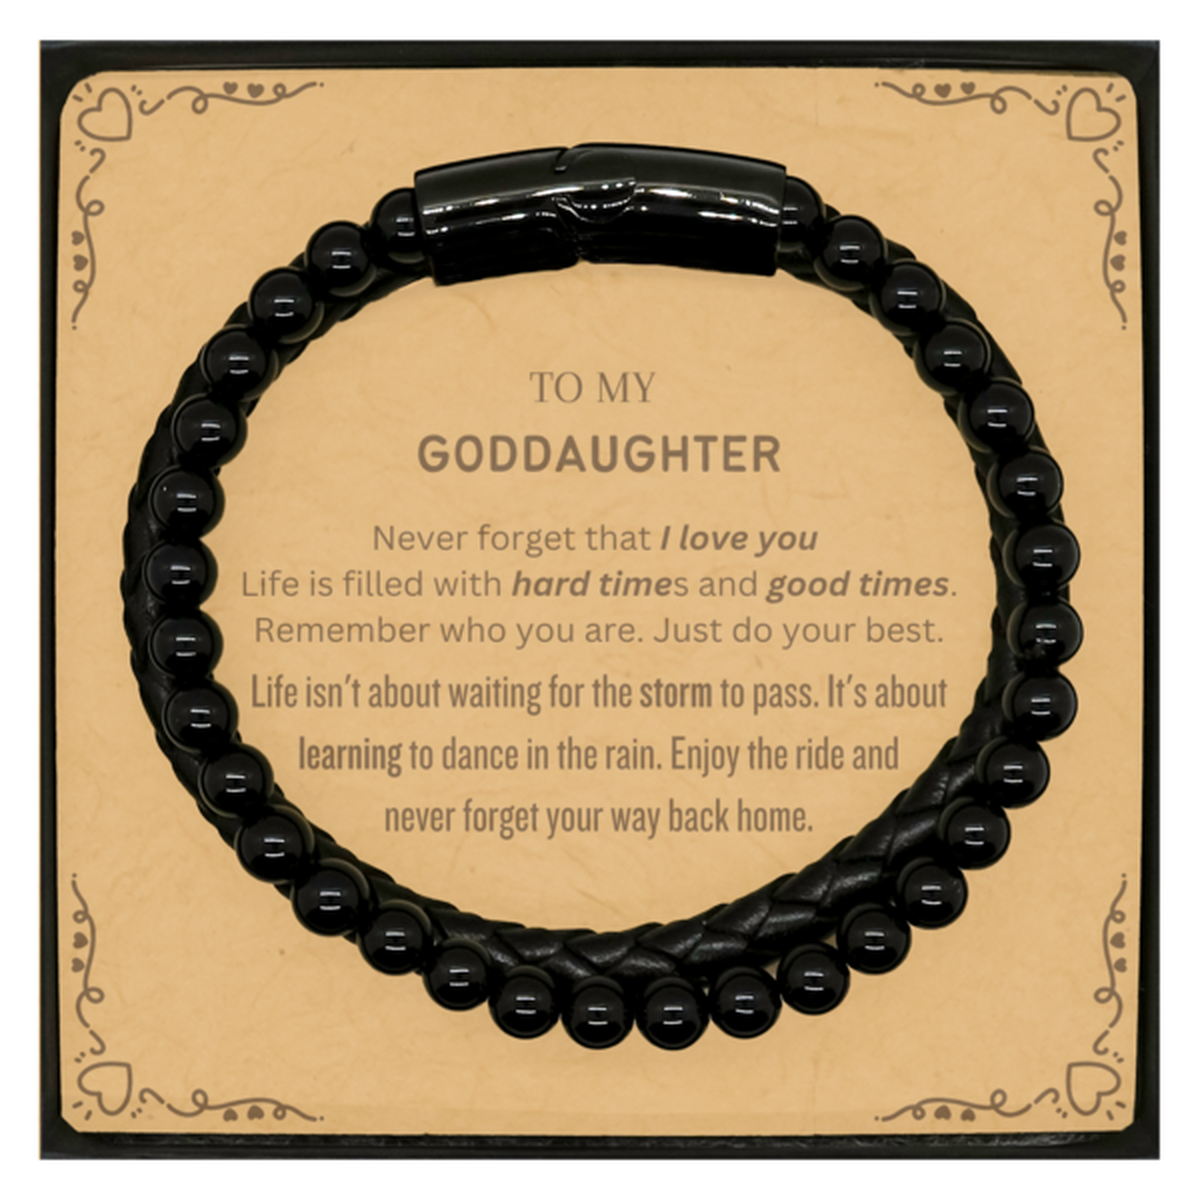 Christmas Goddaughter Stone Leather Bracelets Gifts, To My Goddaughter Birthday Thank You Gifts For Goddaughter, Graduation Unique Gifts For Goddaughter To My Goddaughter Never forget that I love you life is filled with hard times and good times. Remember